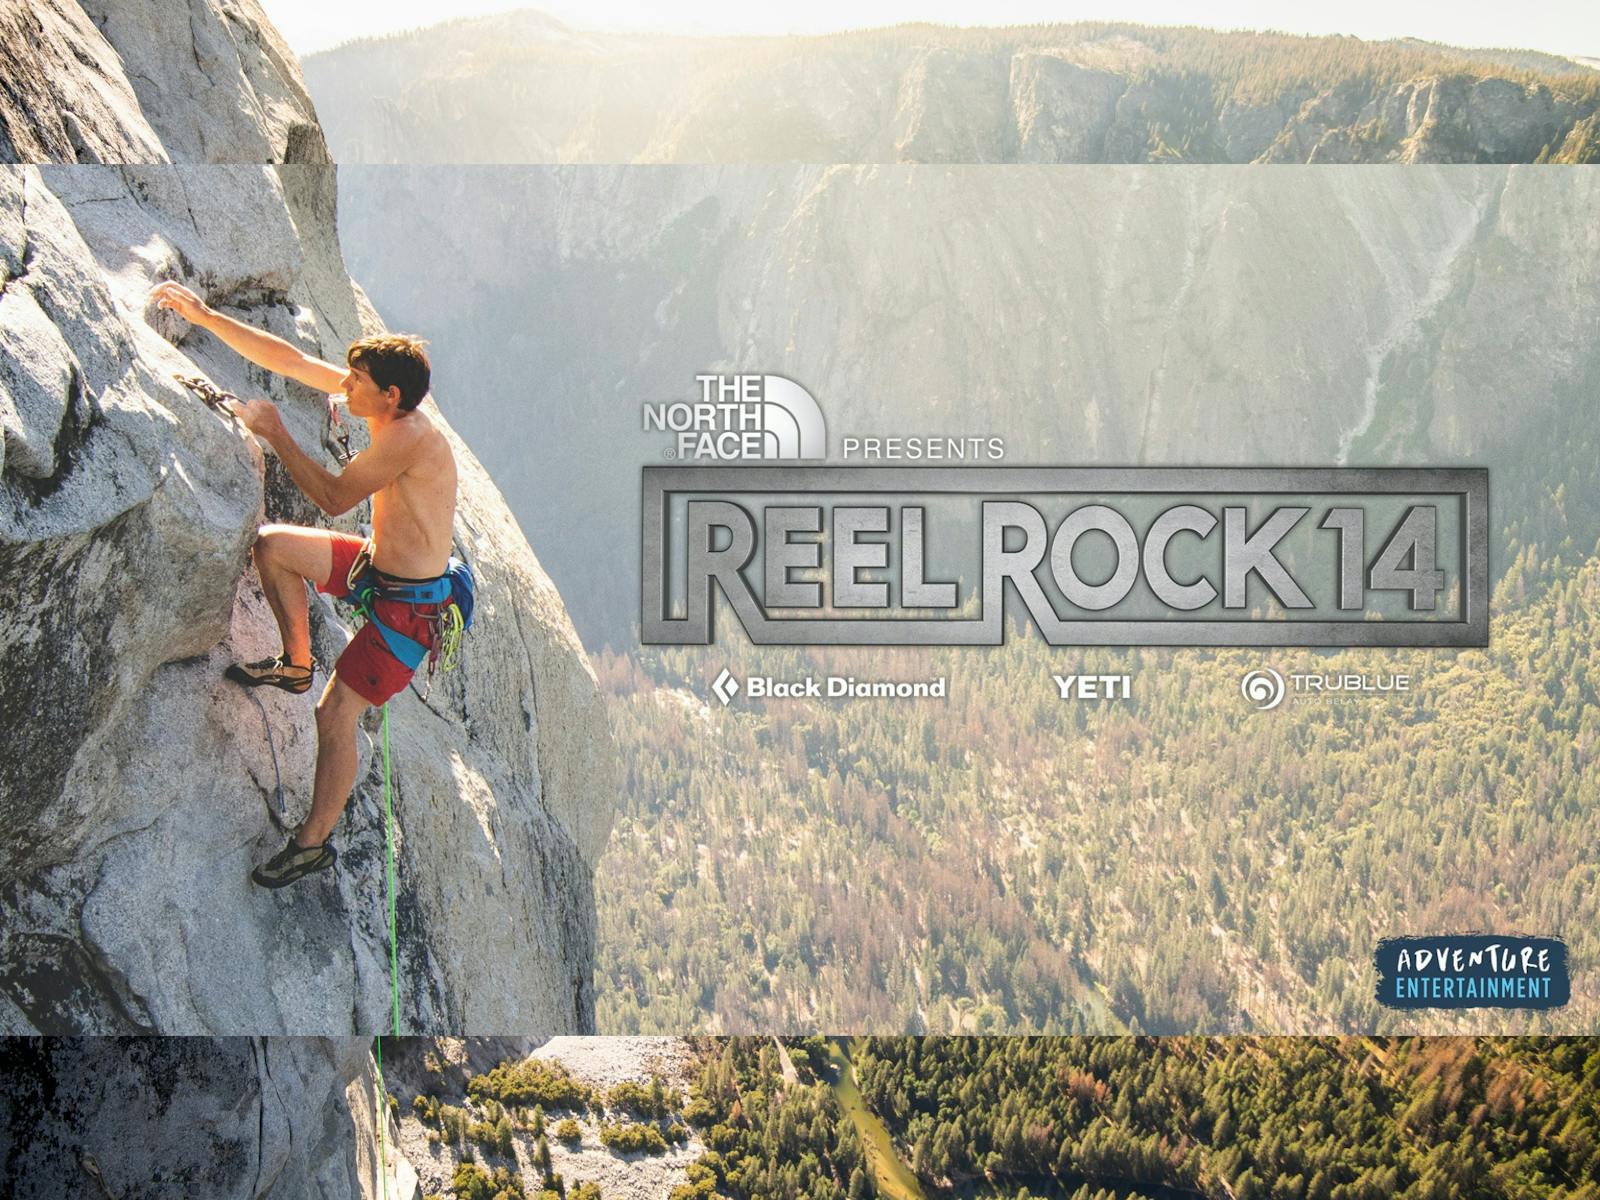 Image for Reel Rock 14 - Blue Mountains, presented by The North Face